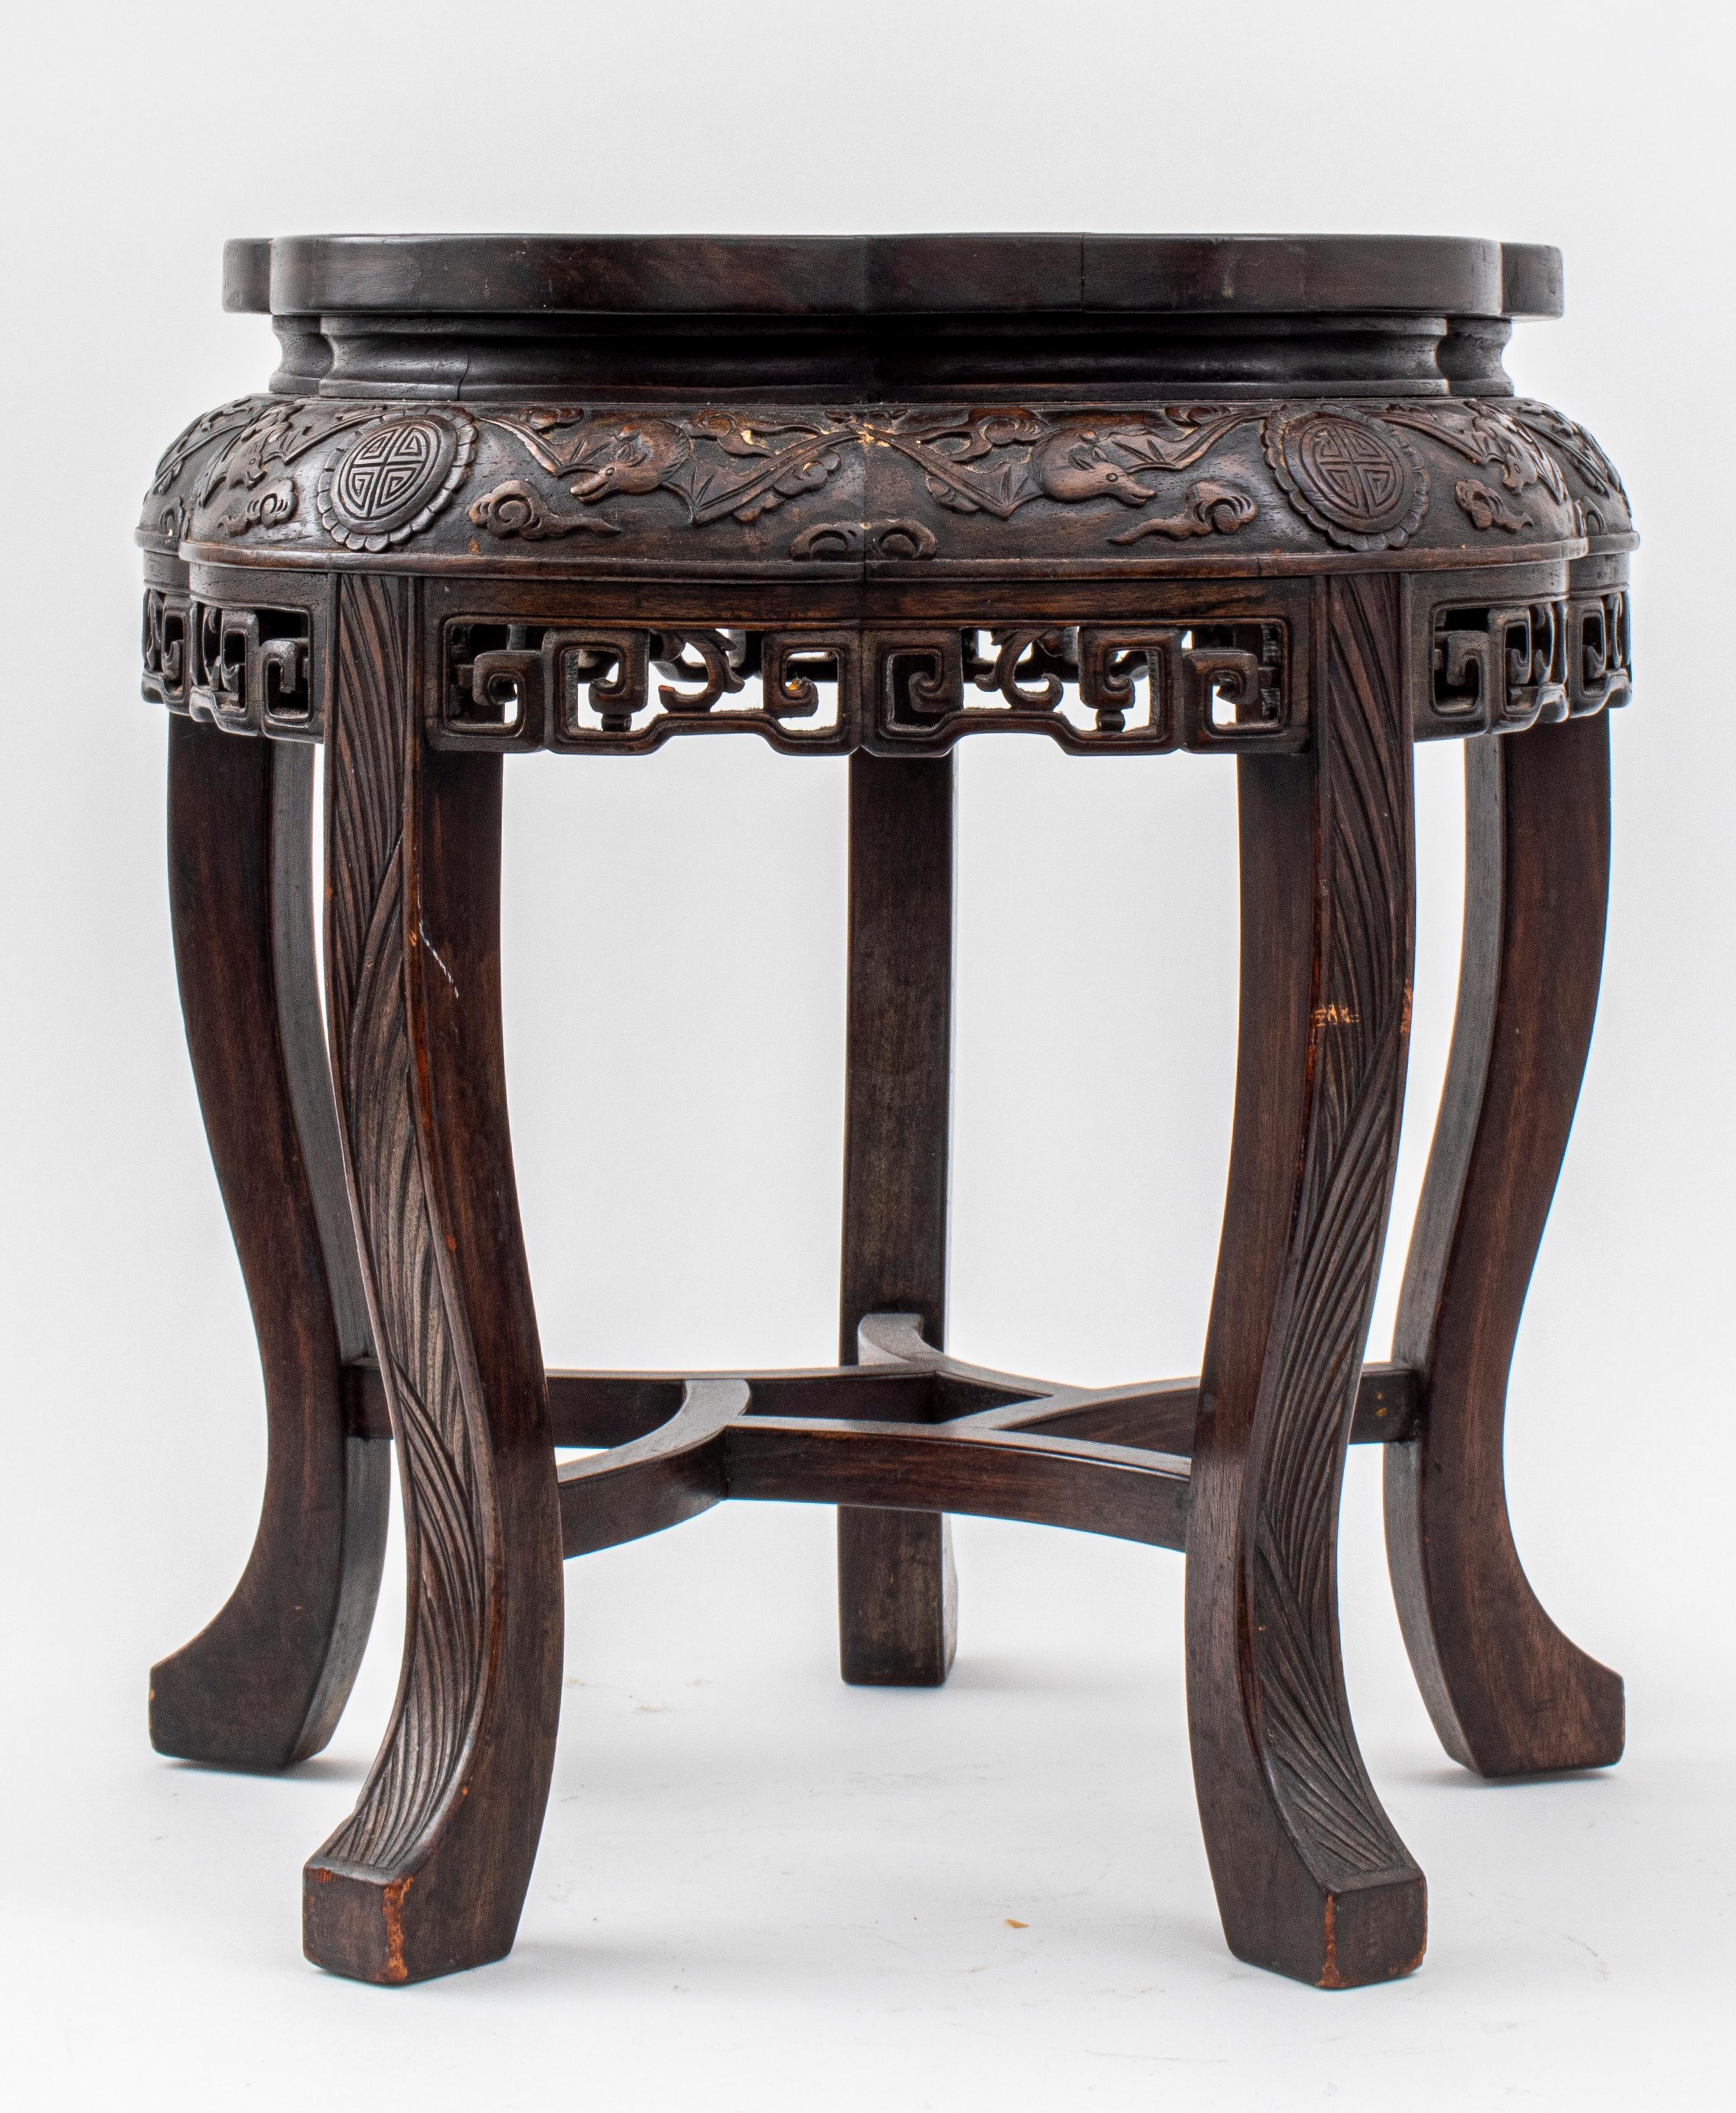 Chinese wood table carved with bats amongst stylized clouds above a pierced geometric apron, upon five cabriole legs. 

Dealer: S138XX